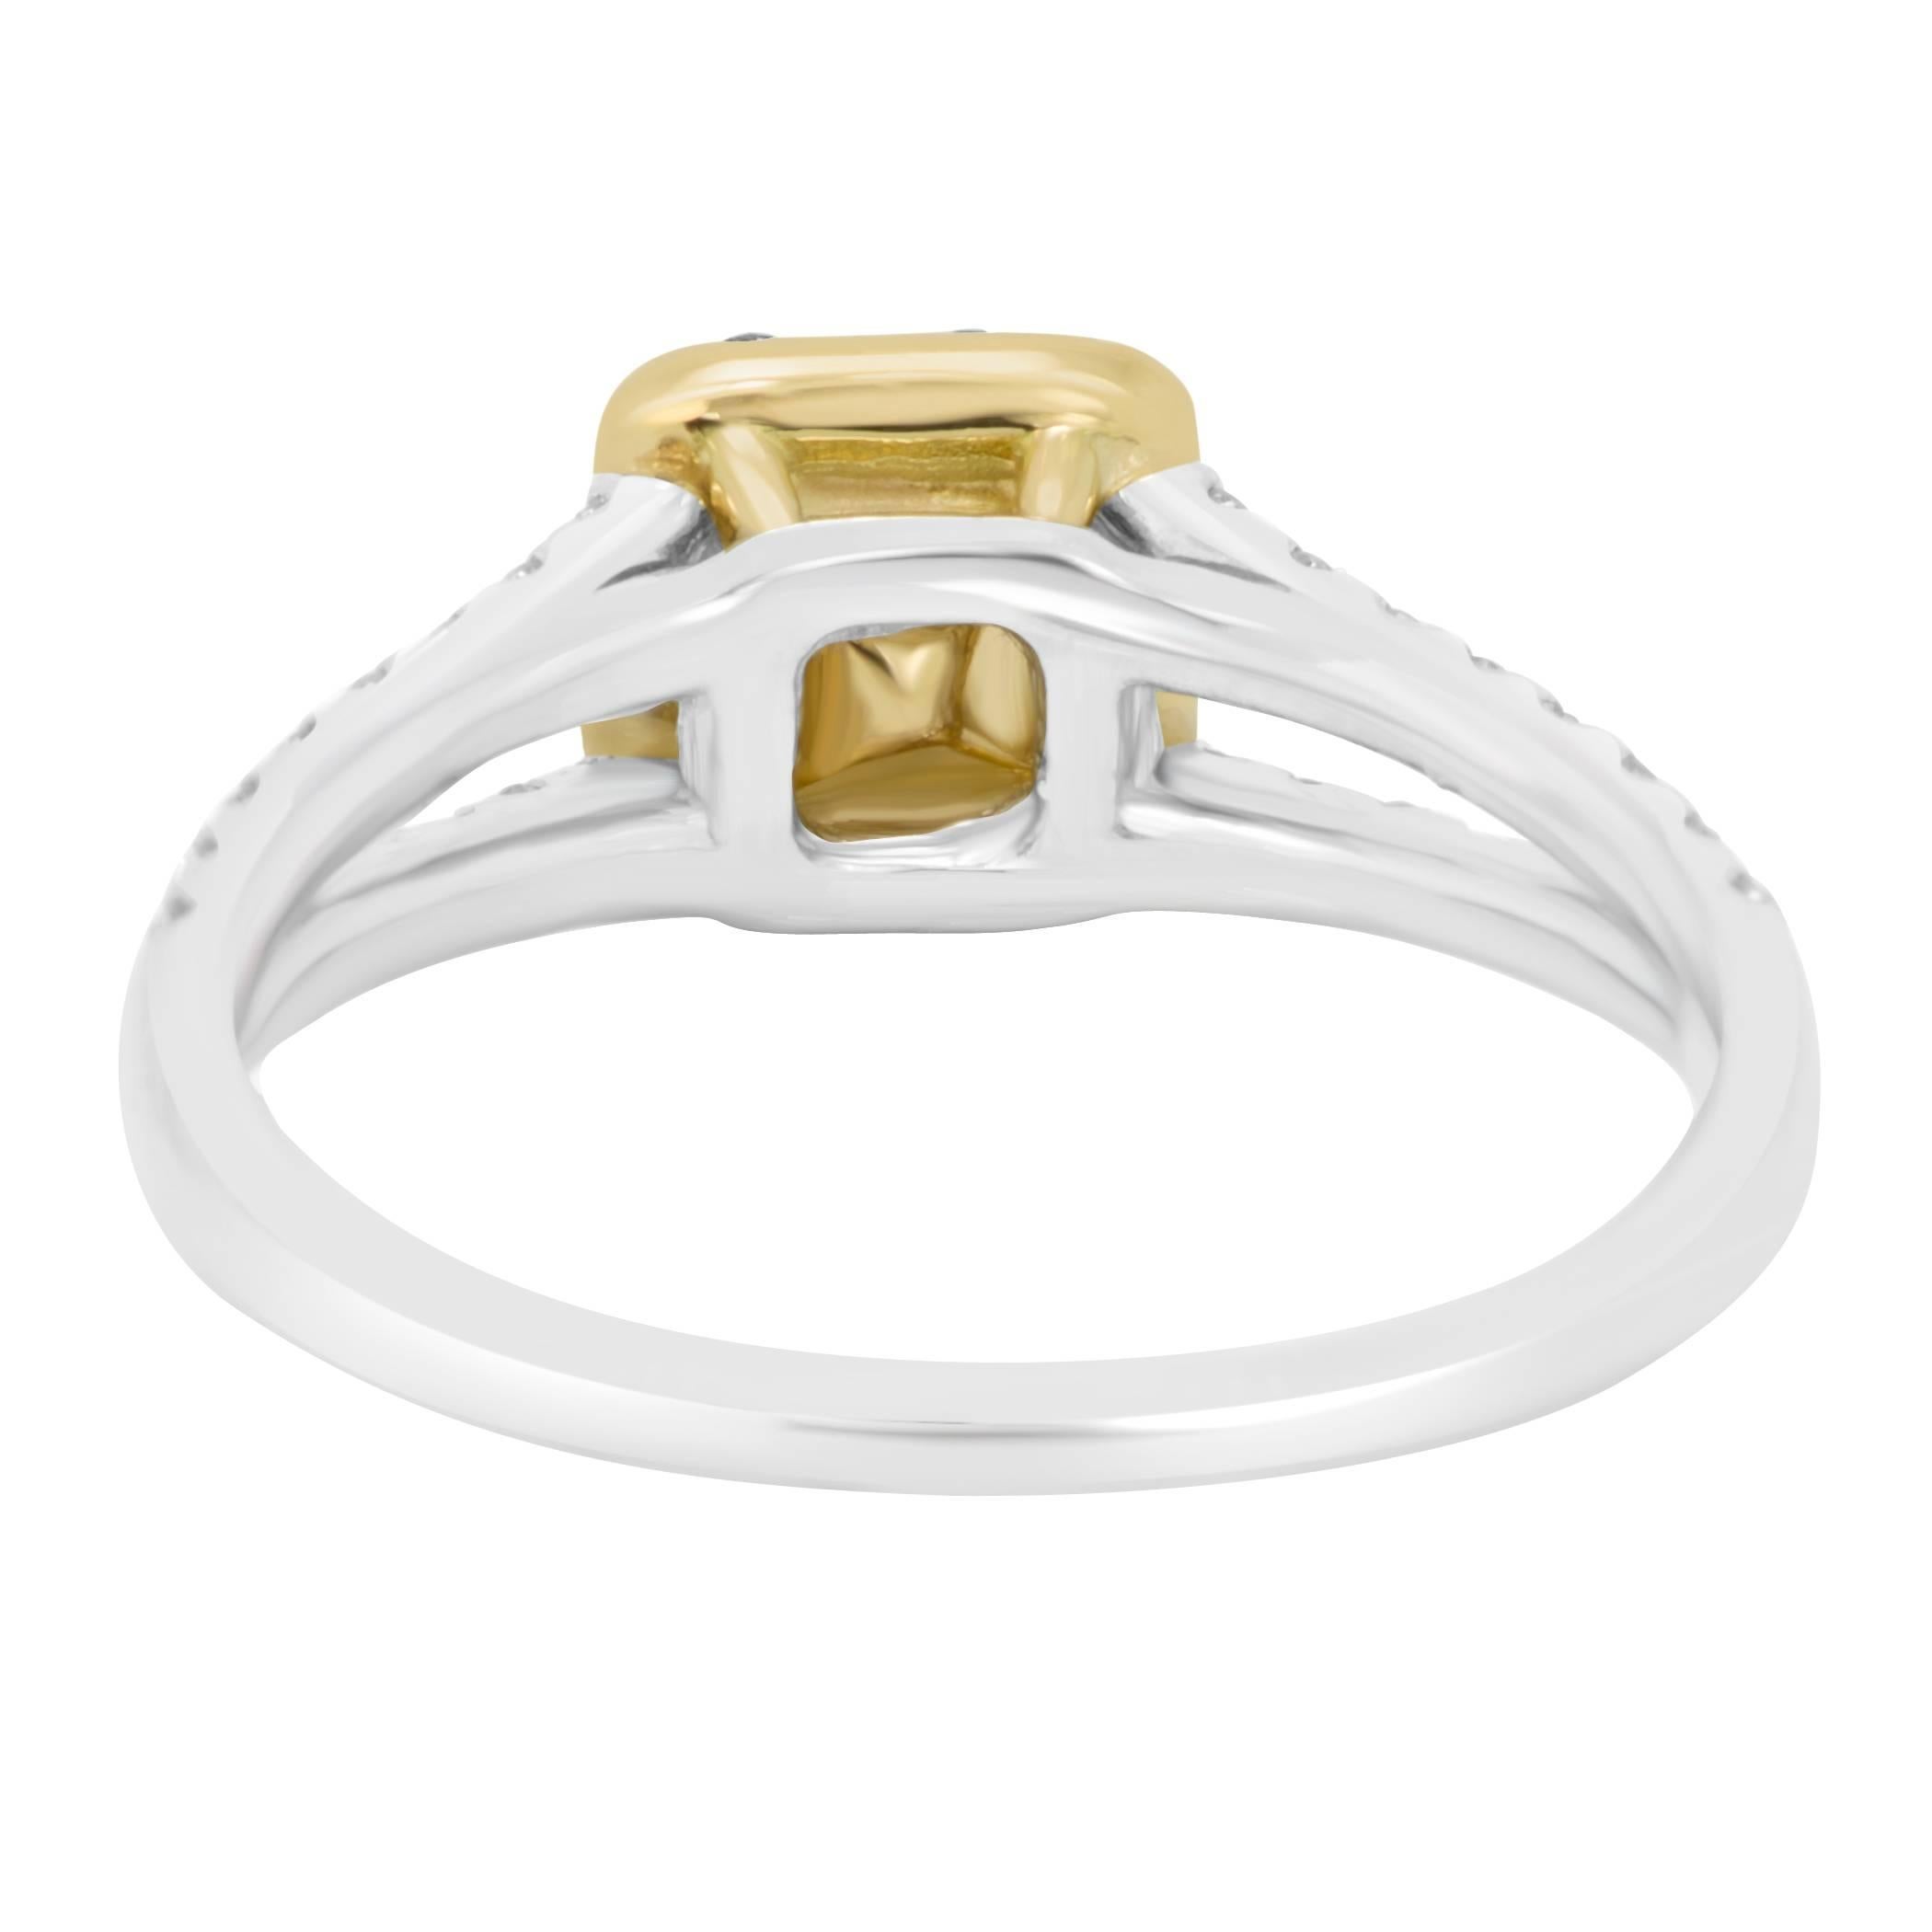 Women's or Men's Sapphire Round White Diamond Halo Two Color Gold Bridal Fashion Cocktail Ring